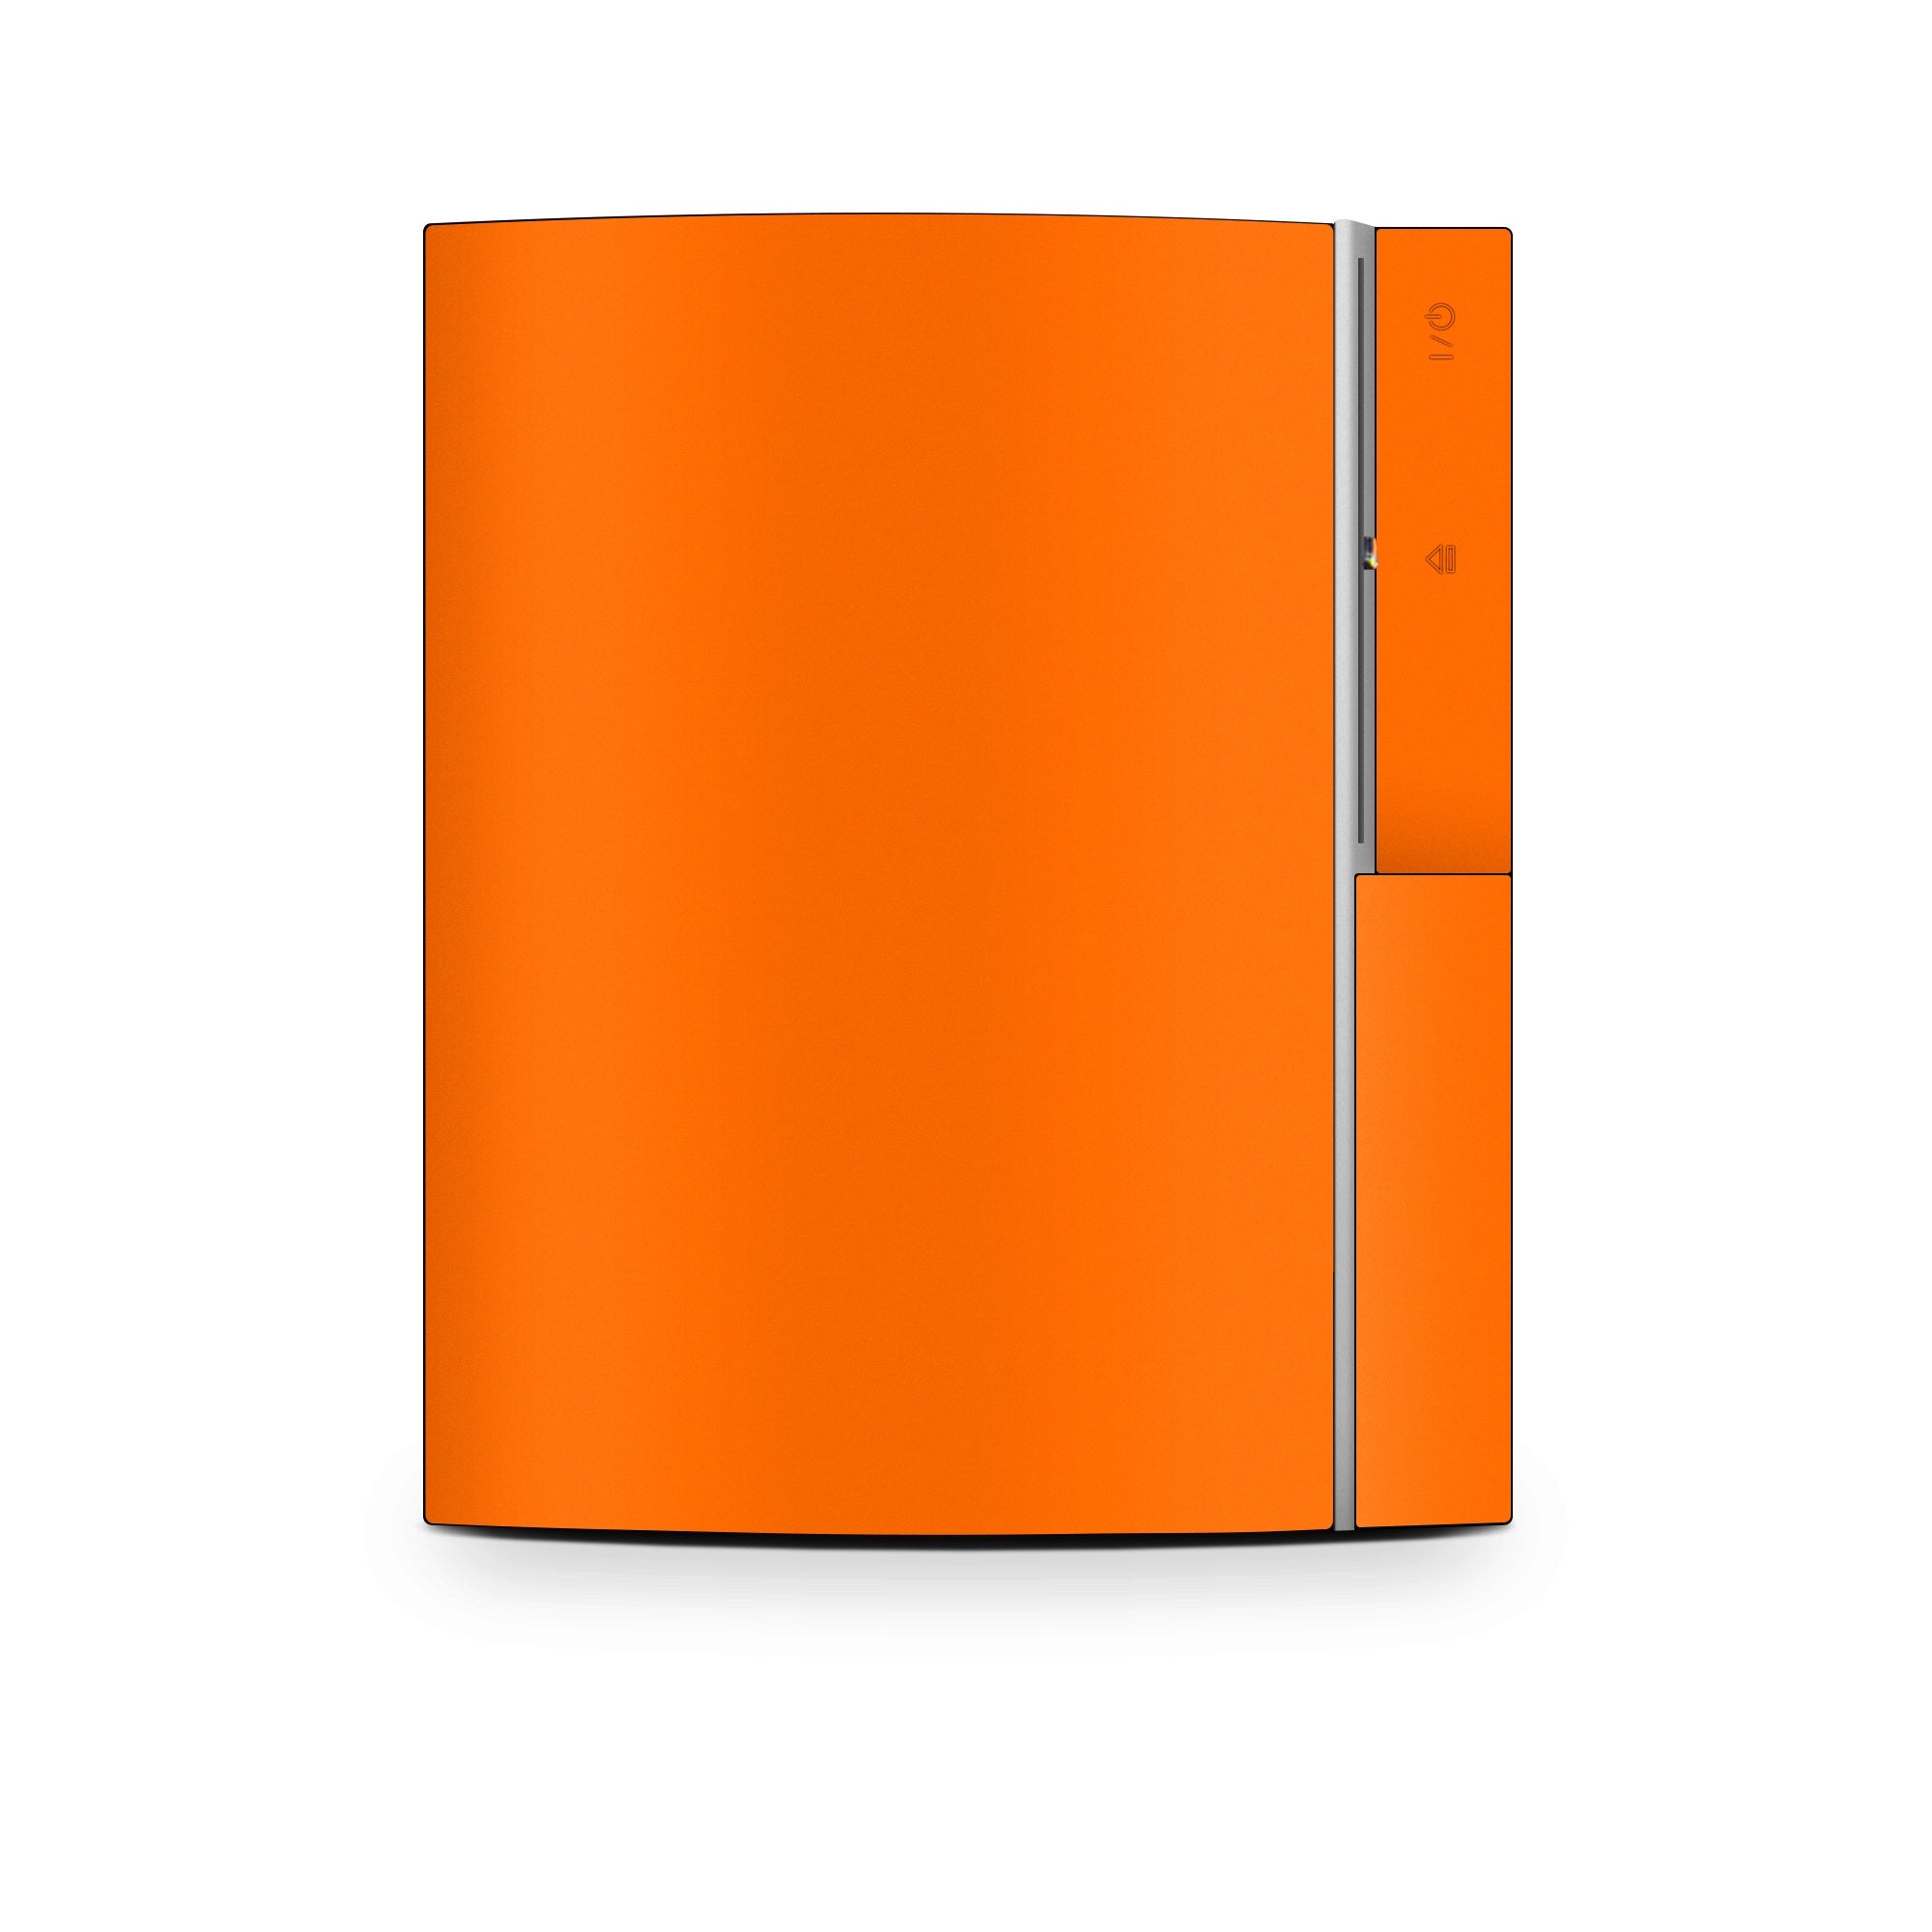 Solid State Pumpkin - Sony PS3 Skin